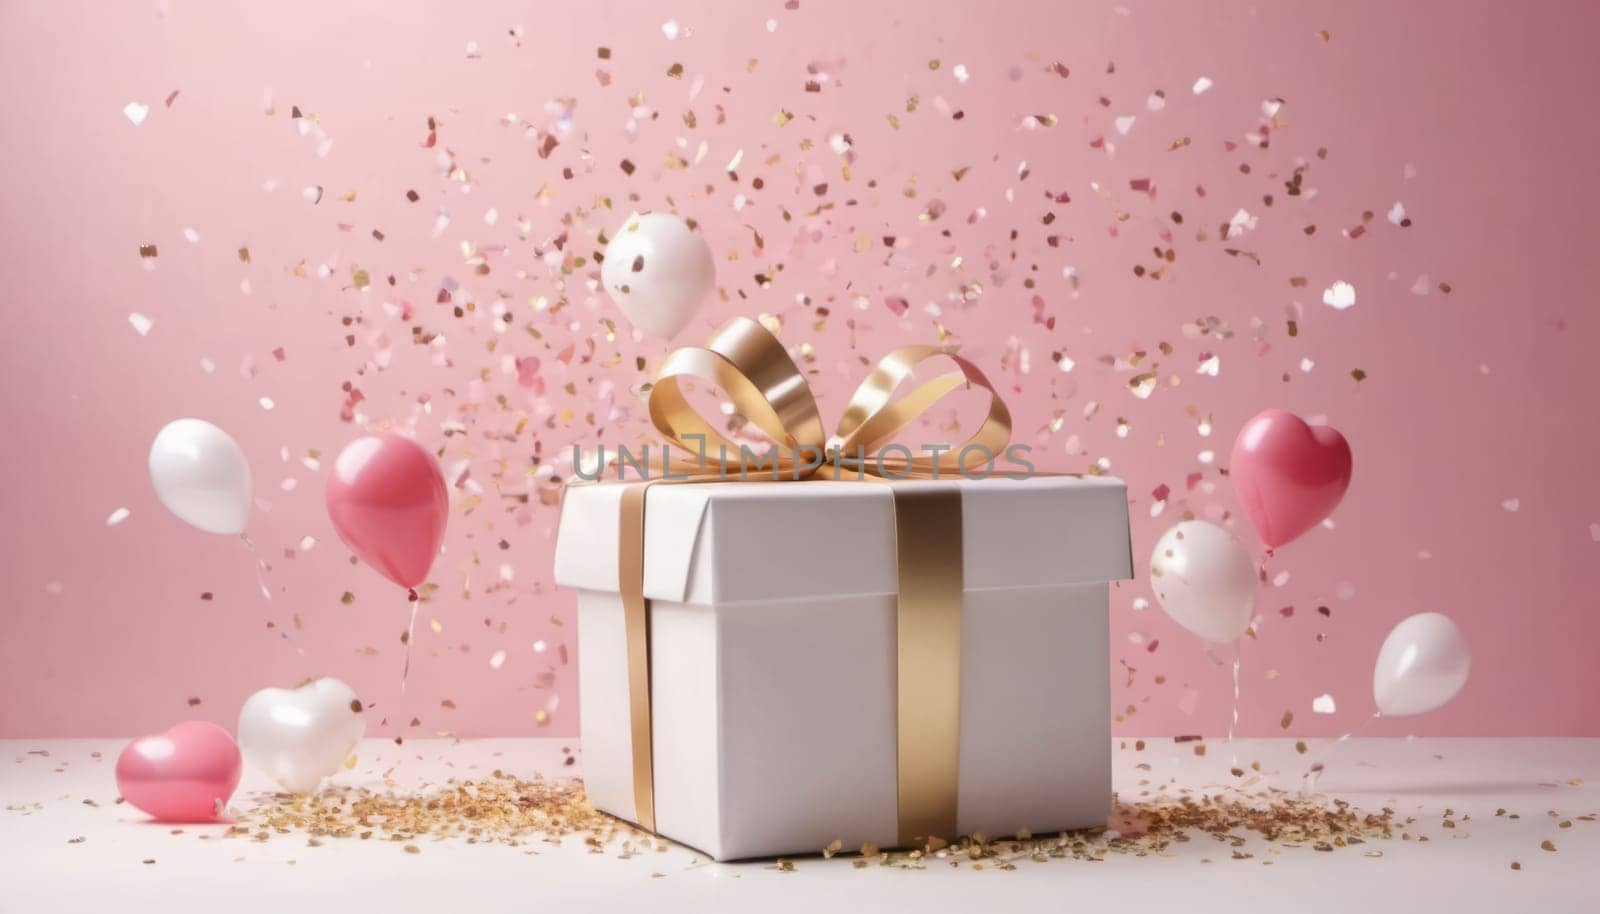 Happy valentines day decoration with gift boxes, heart shape white, pink and gold colored balloons, C olorful confetti is falling, blurred light pink background, 3D rendering illustration